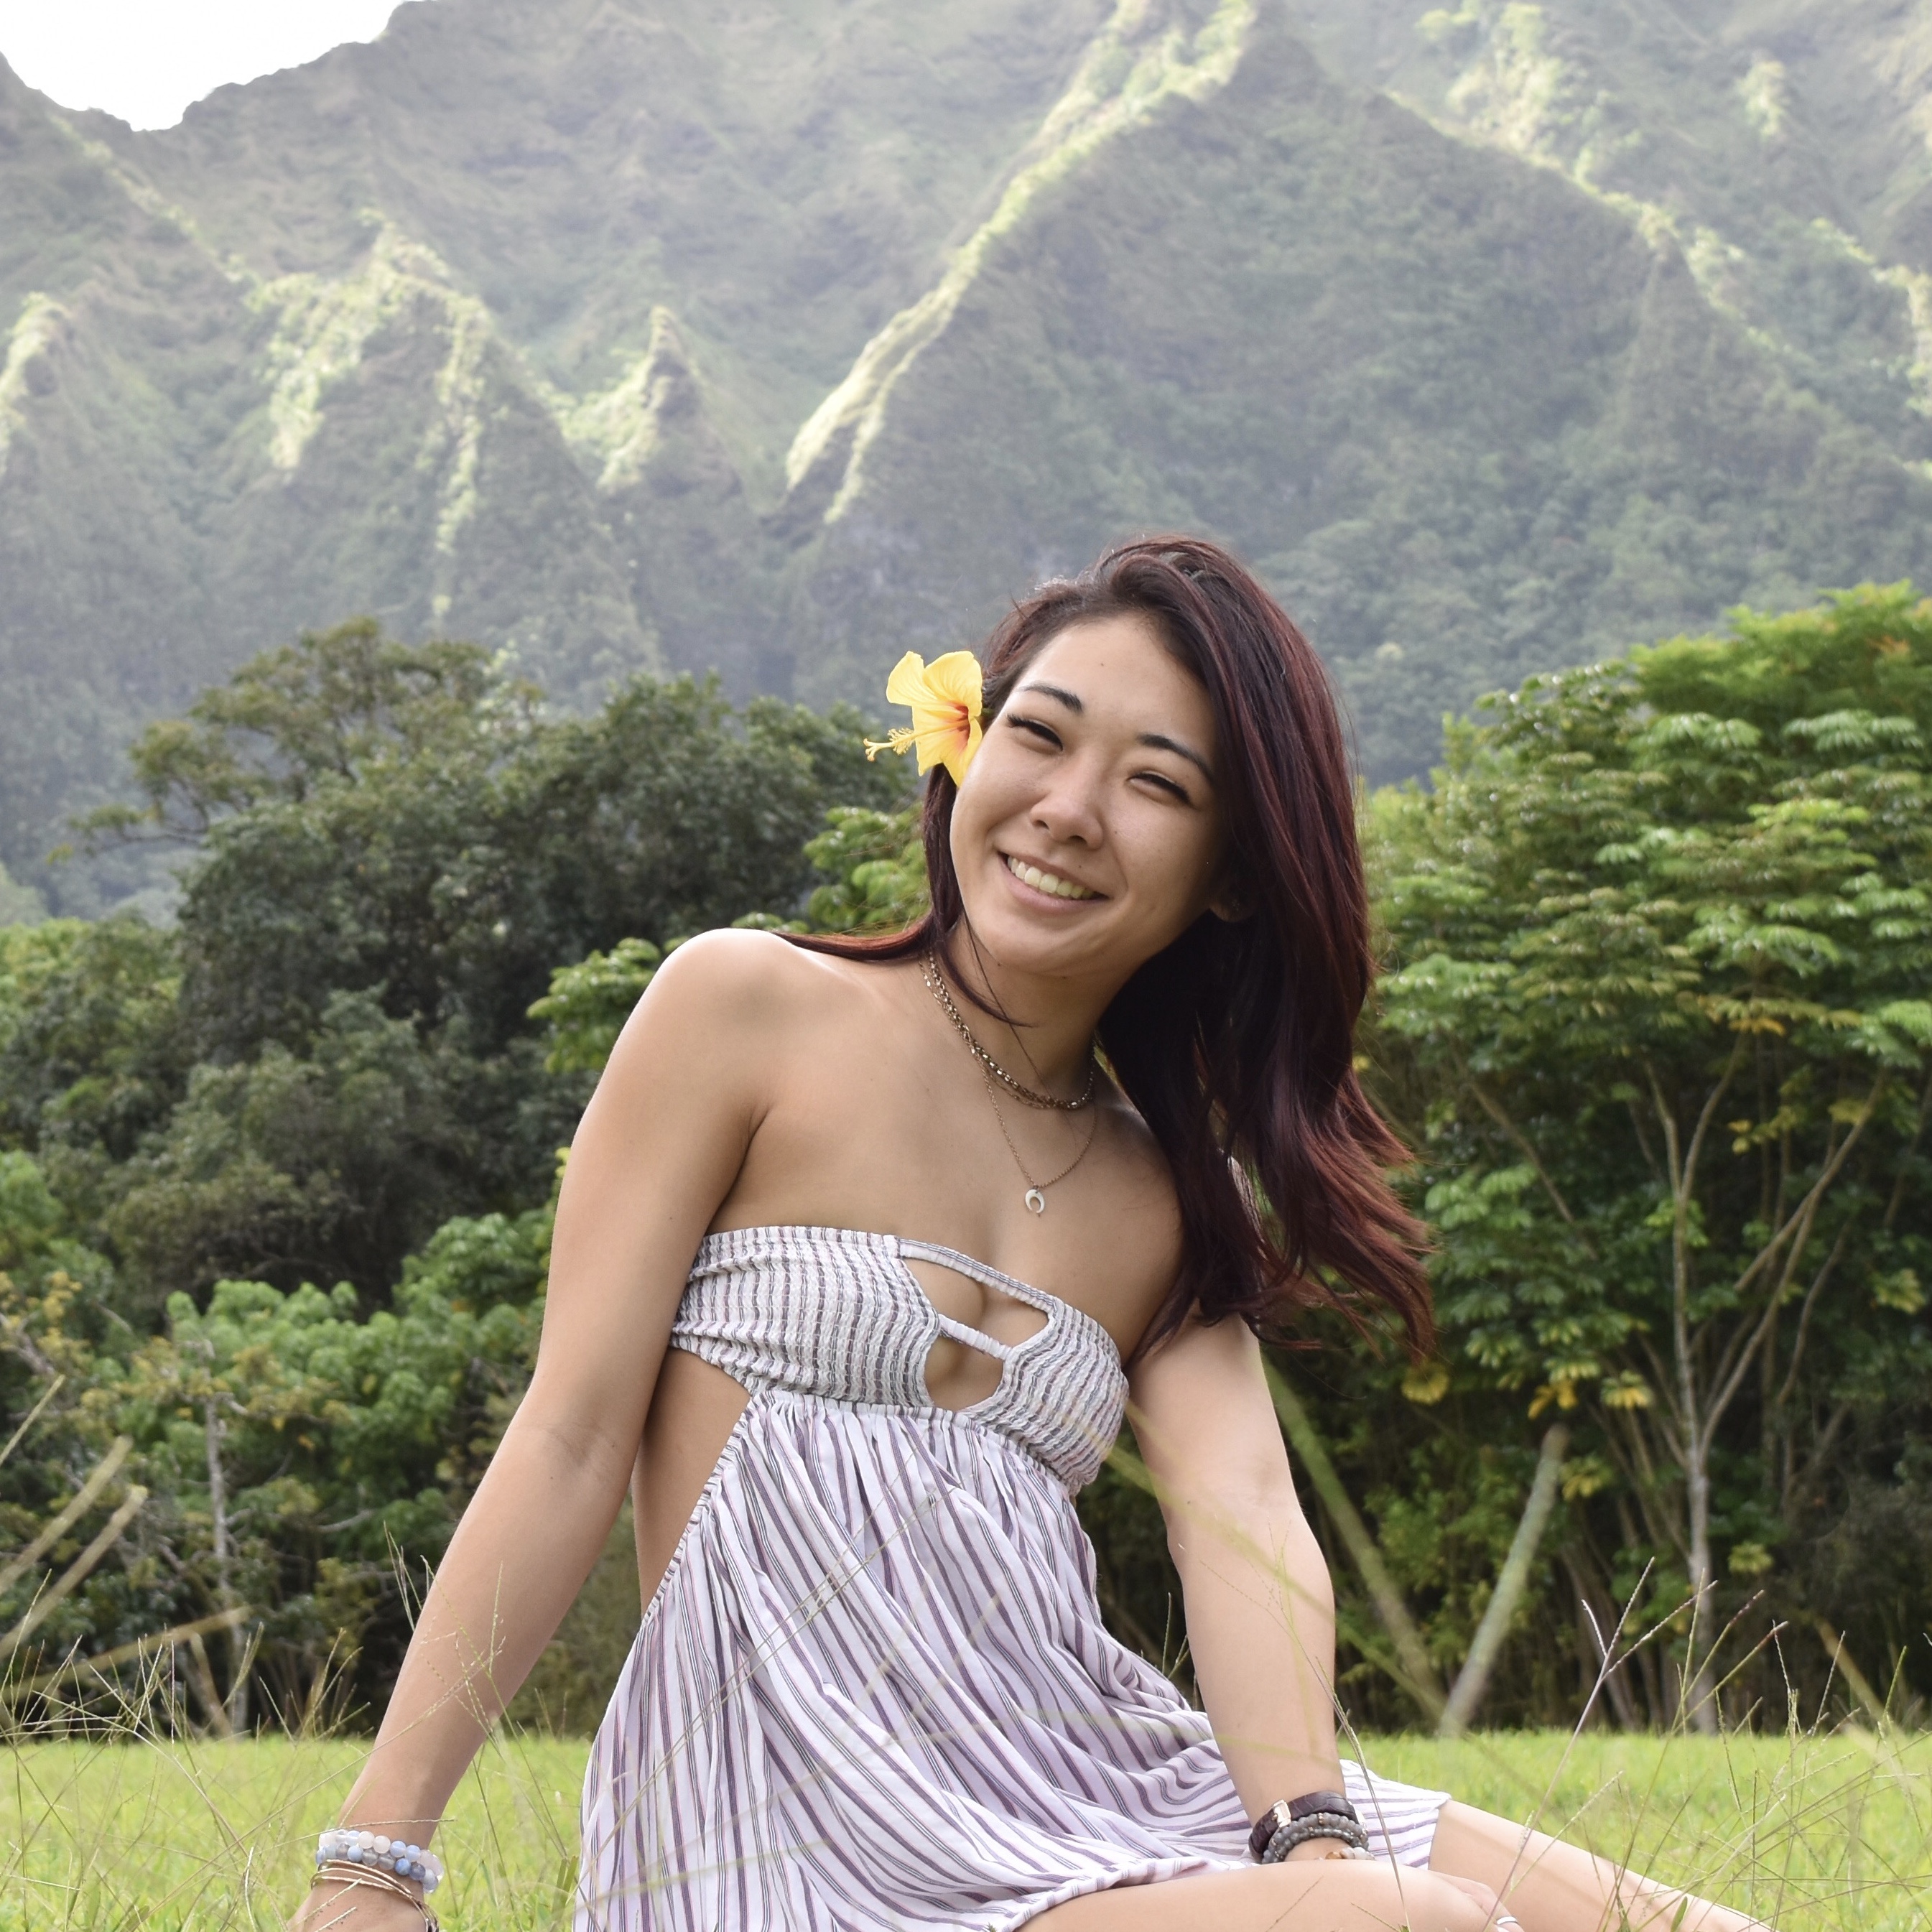 Yaymaker Host Shelley Tottori located in Lihue, HI